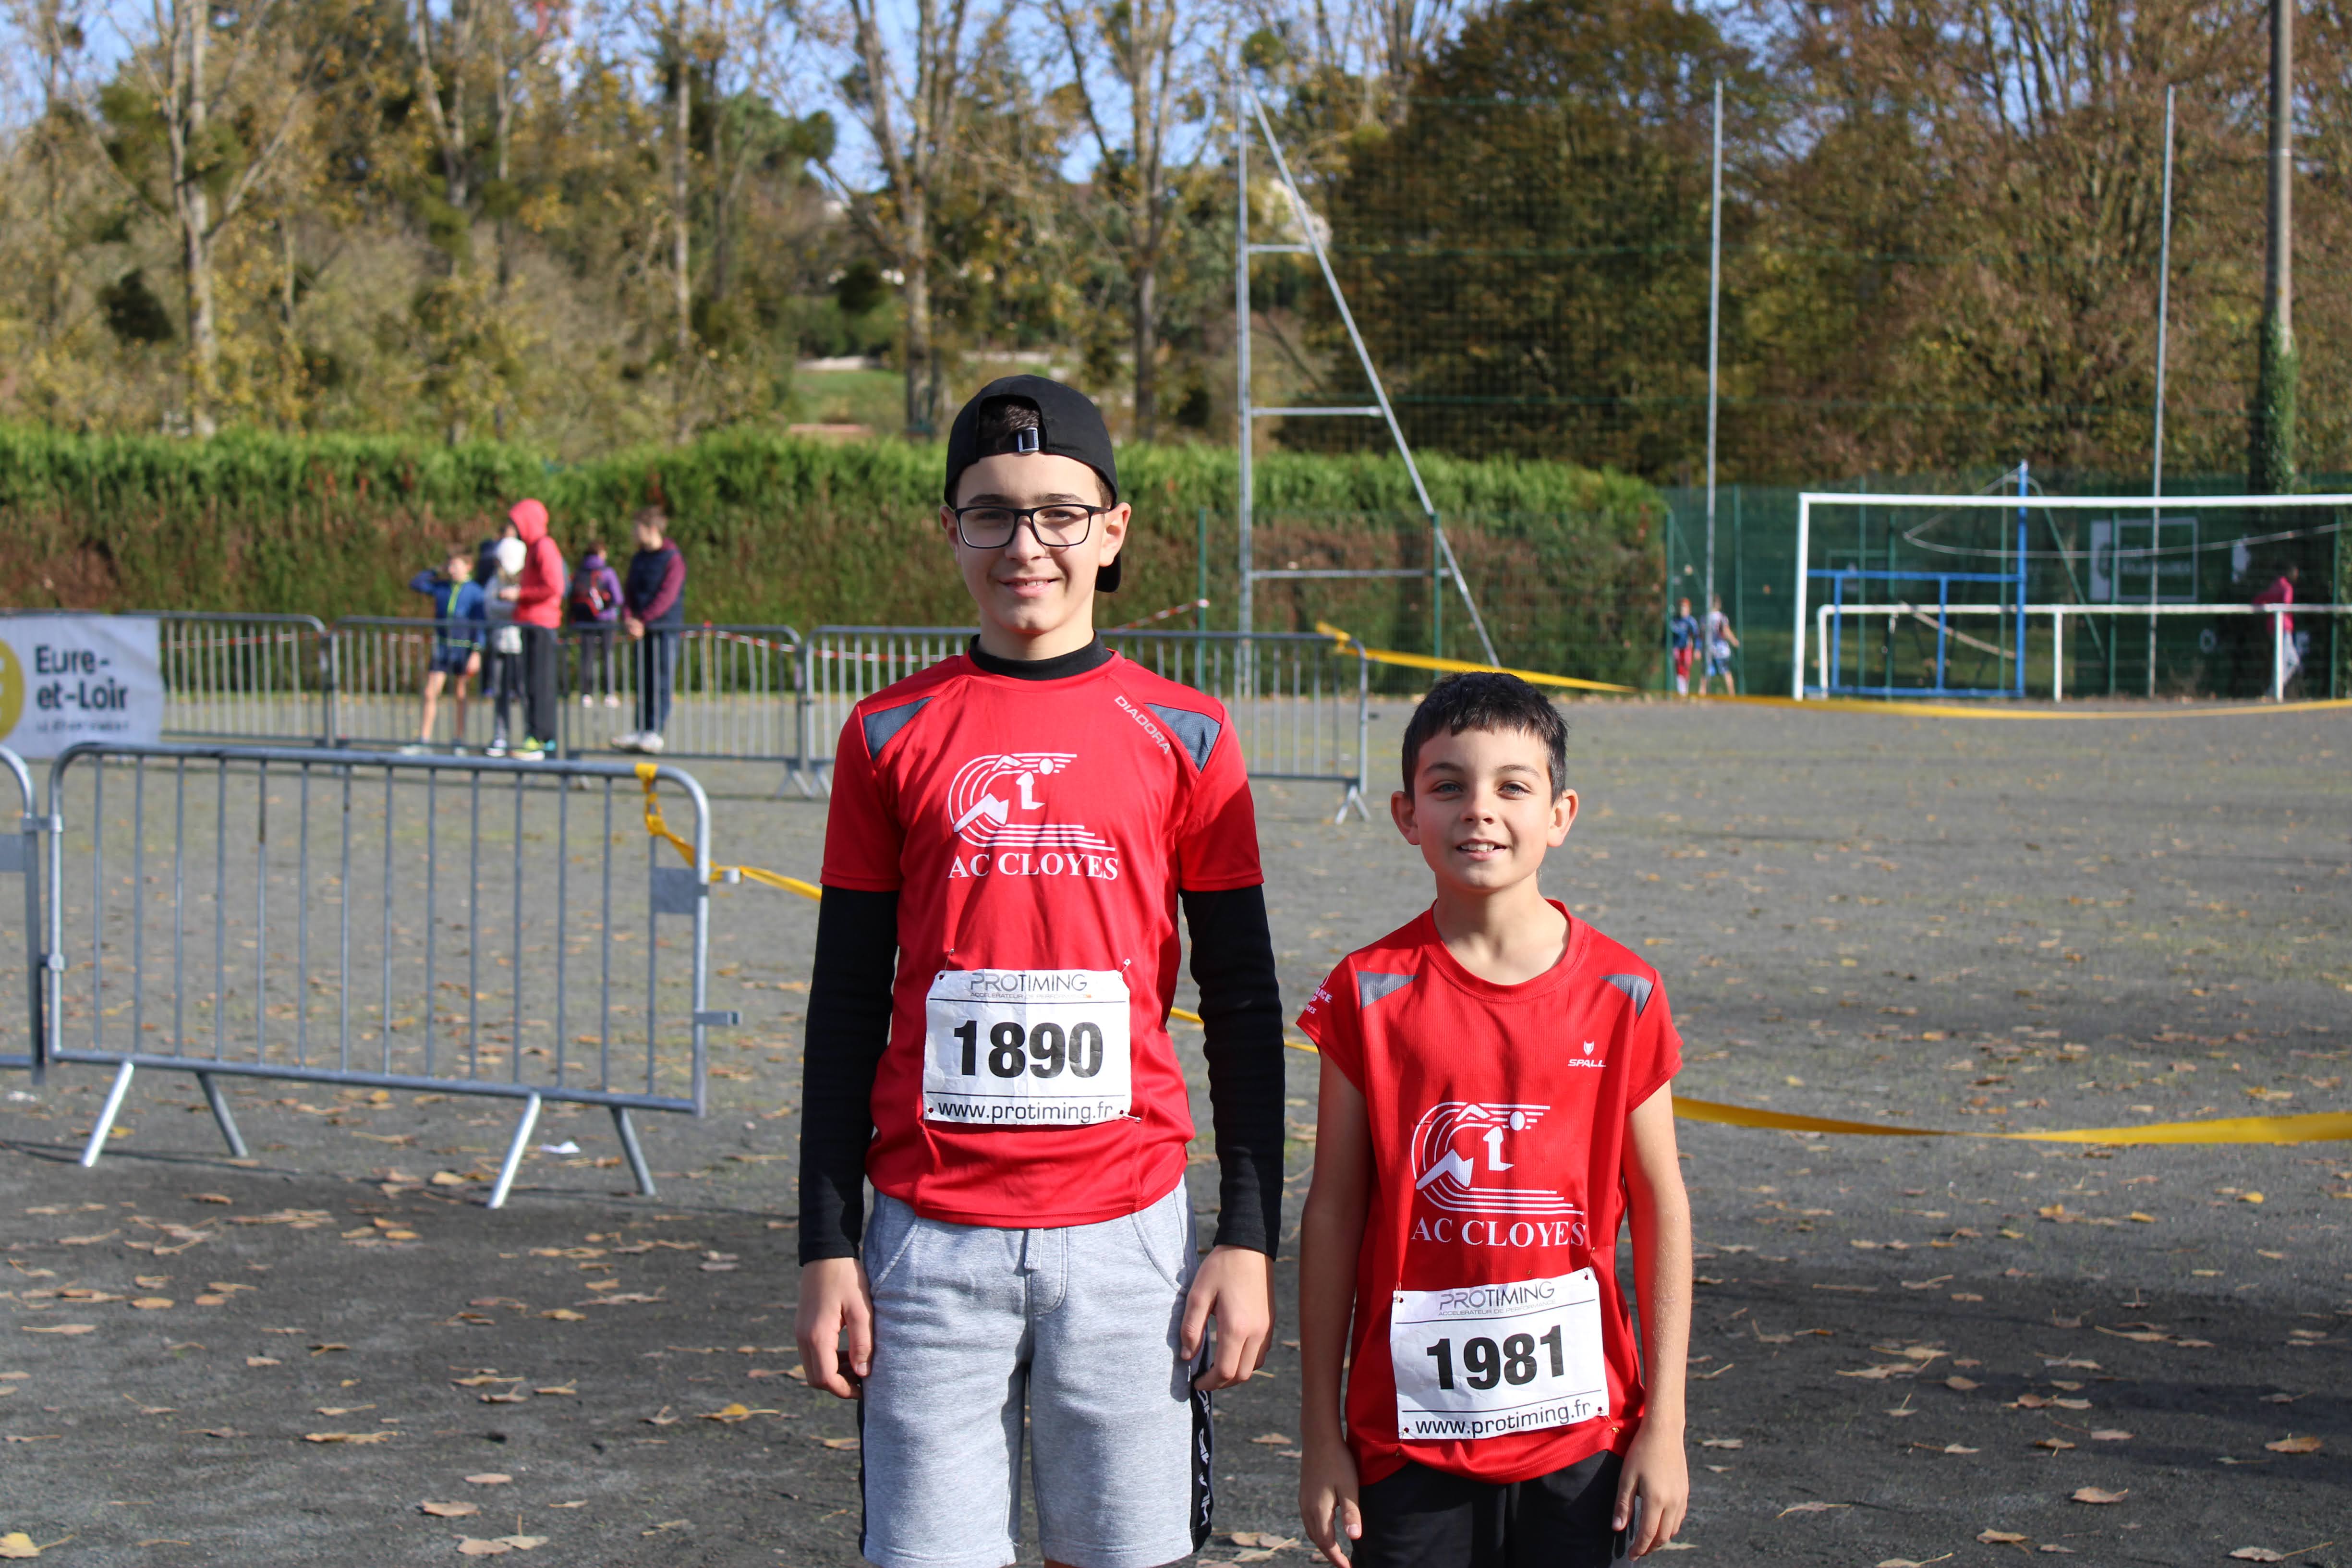 be cross chartres